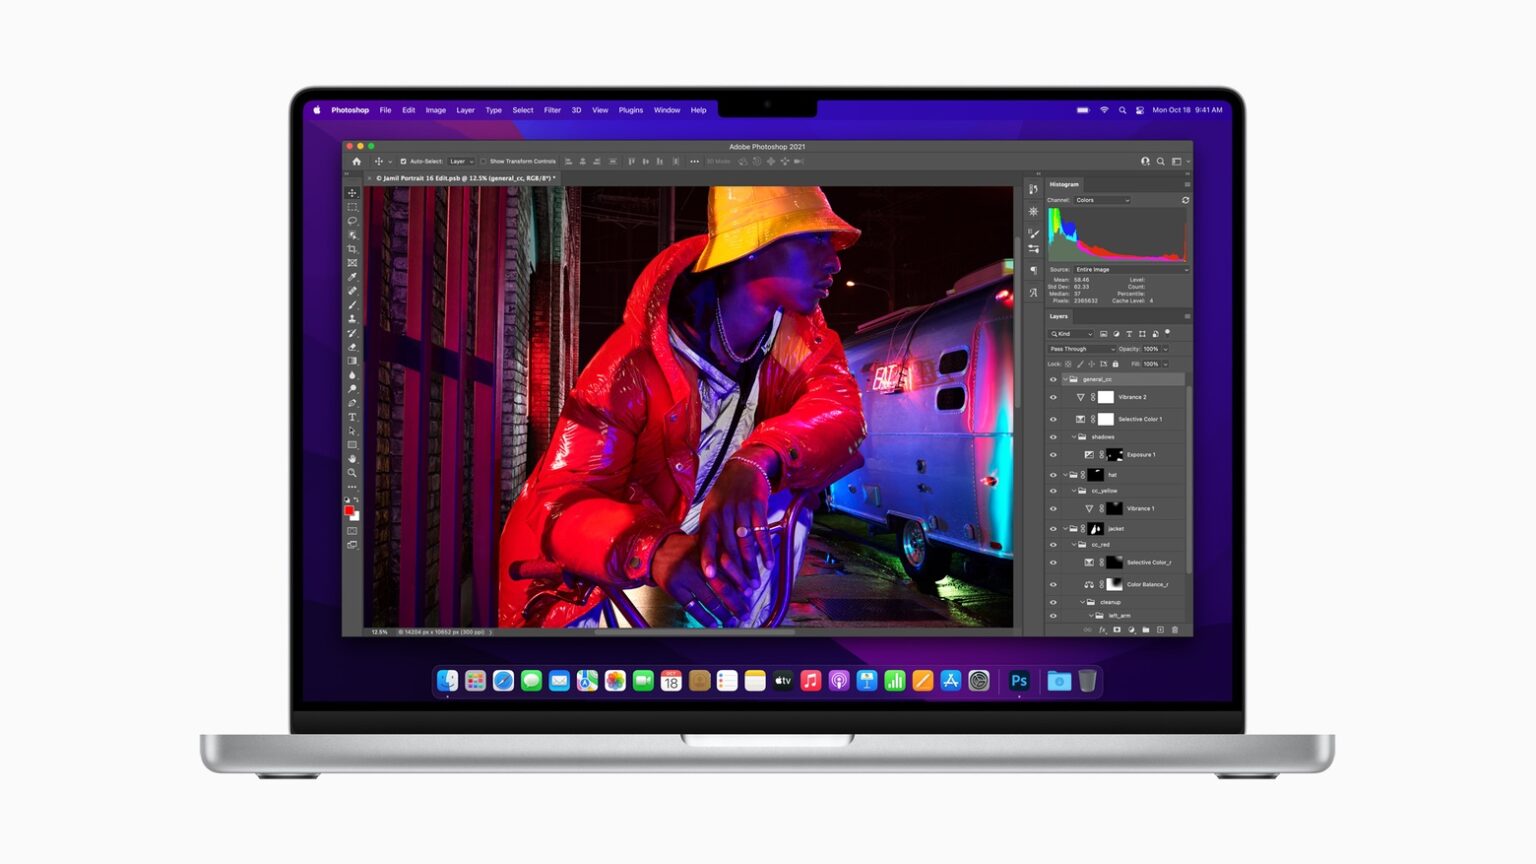 Adobe Photoshop does support the MacBook Pro notch.